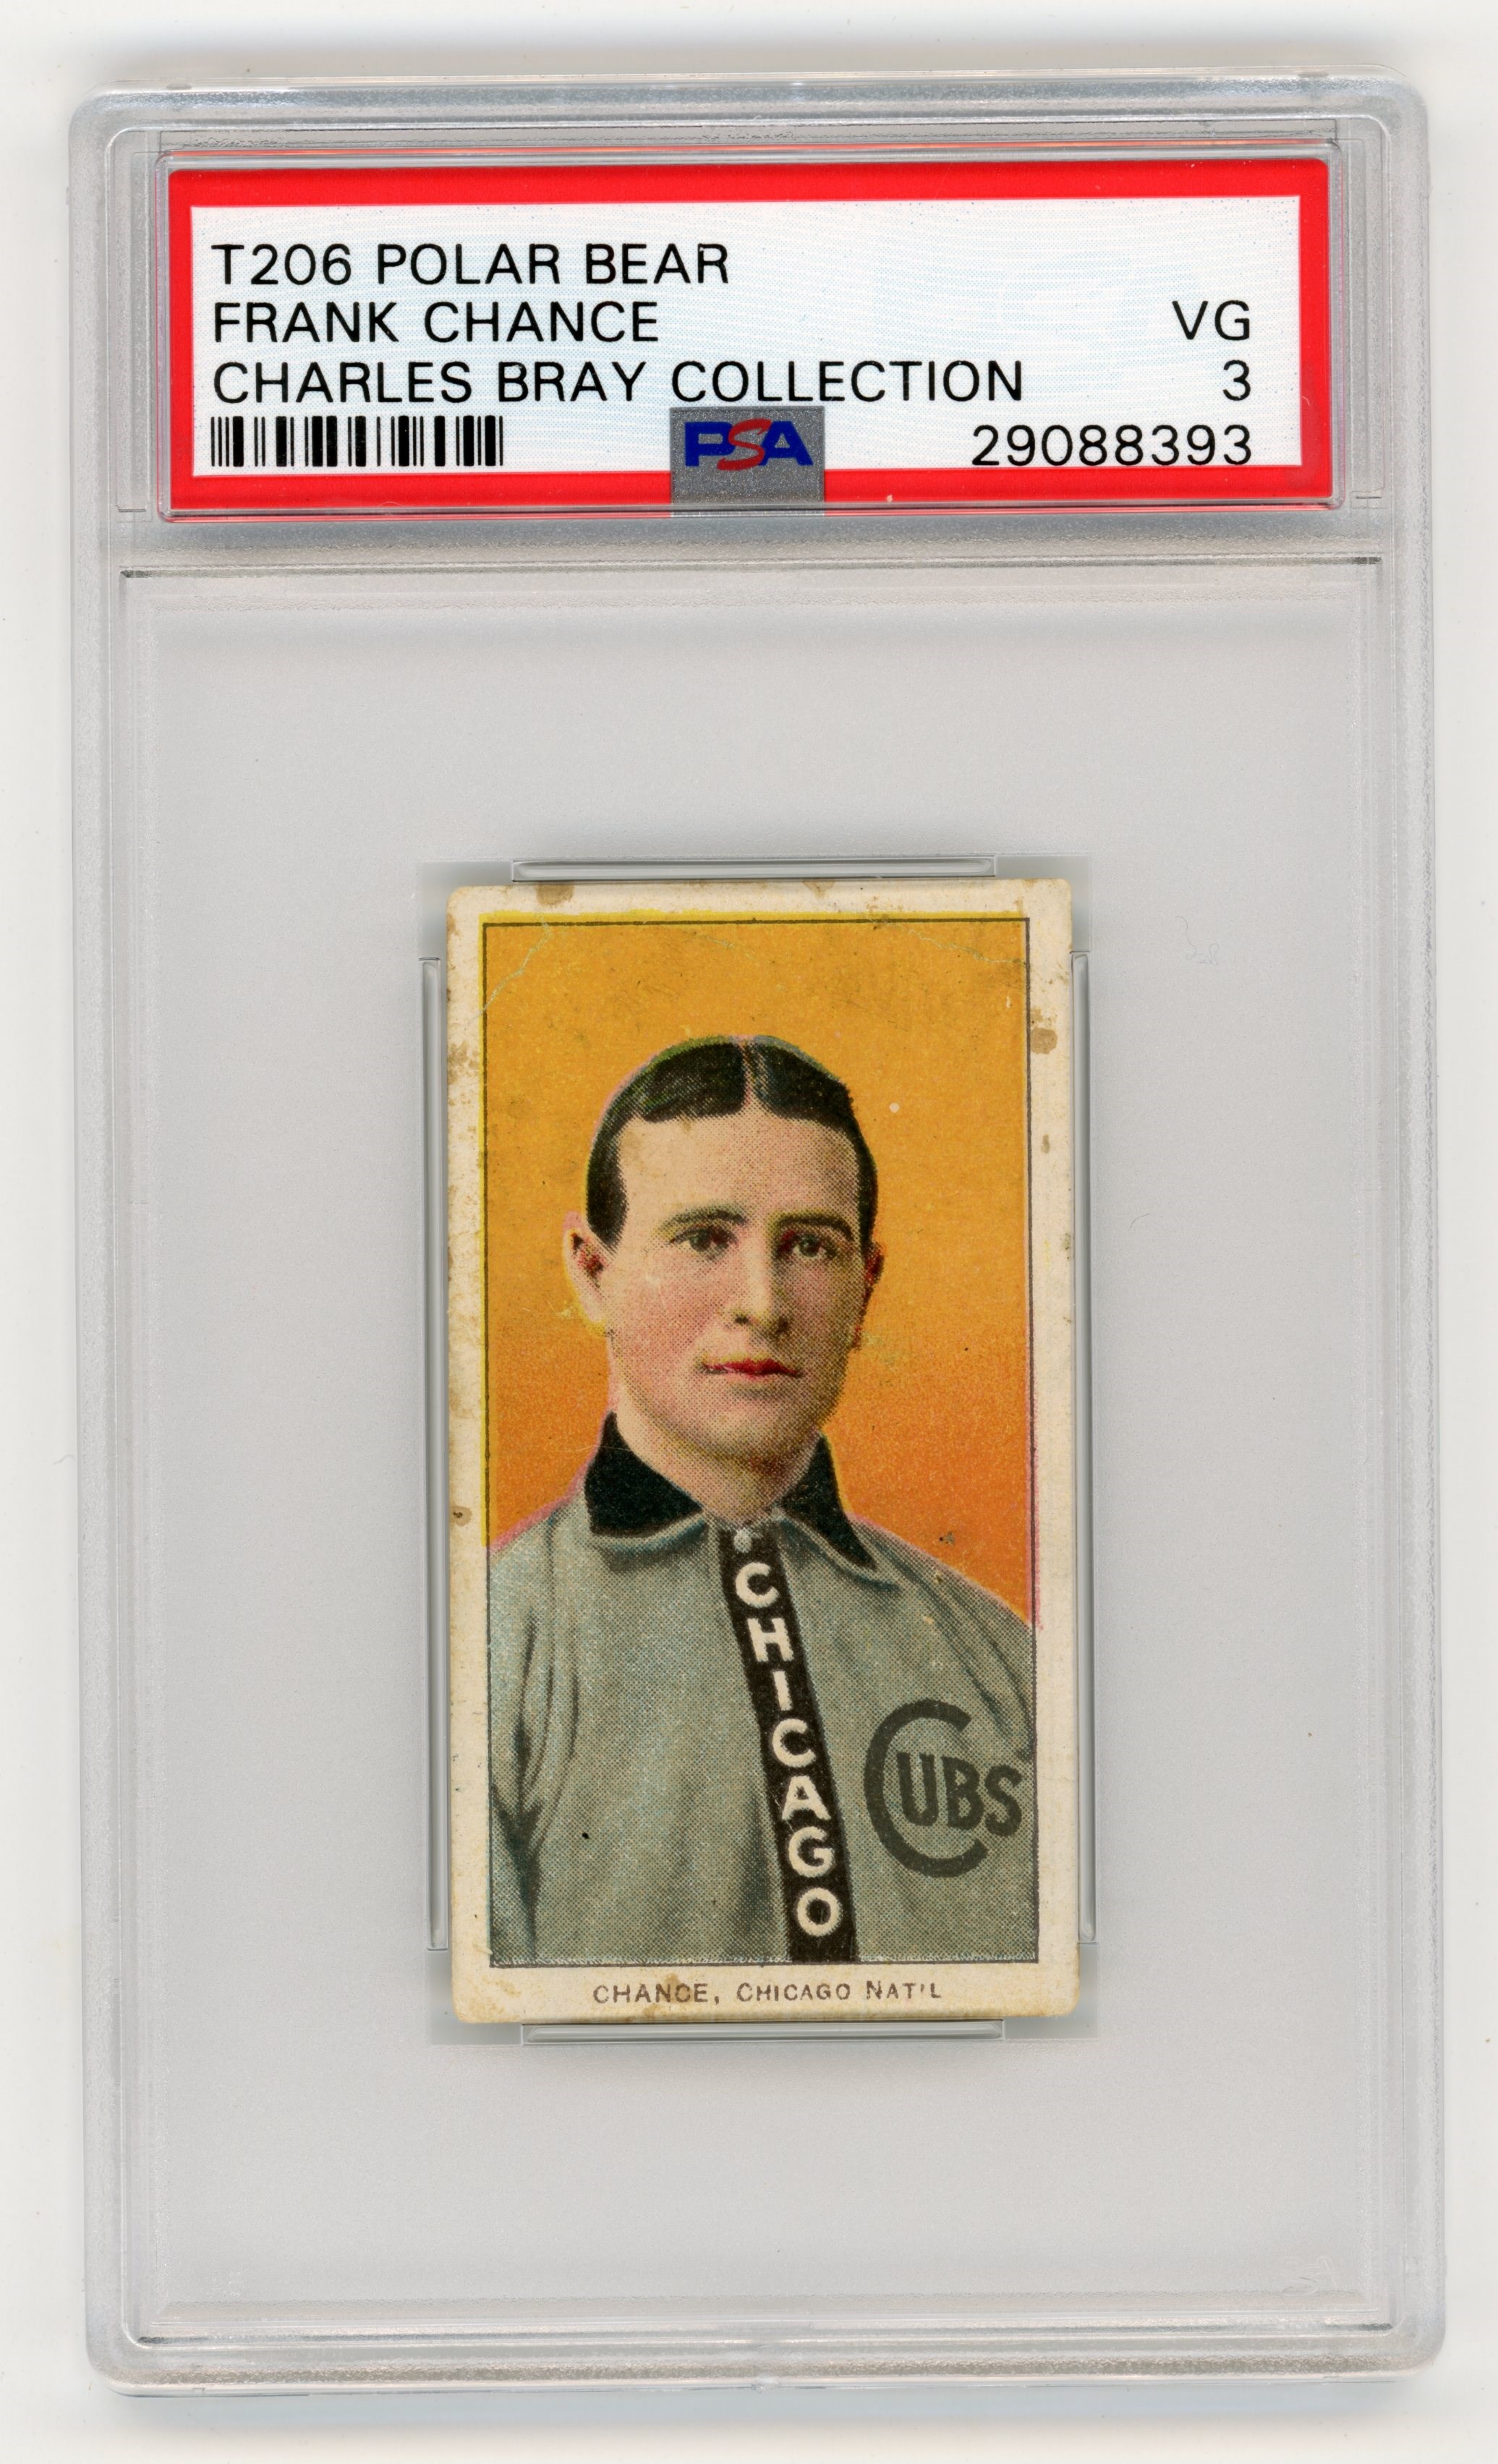 Baseball and Trading Cards - T206 Polar Bear Frank Chance PSA 3 From Charles Bray Collection